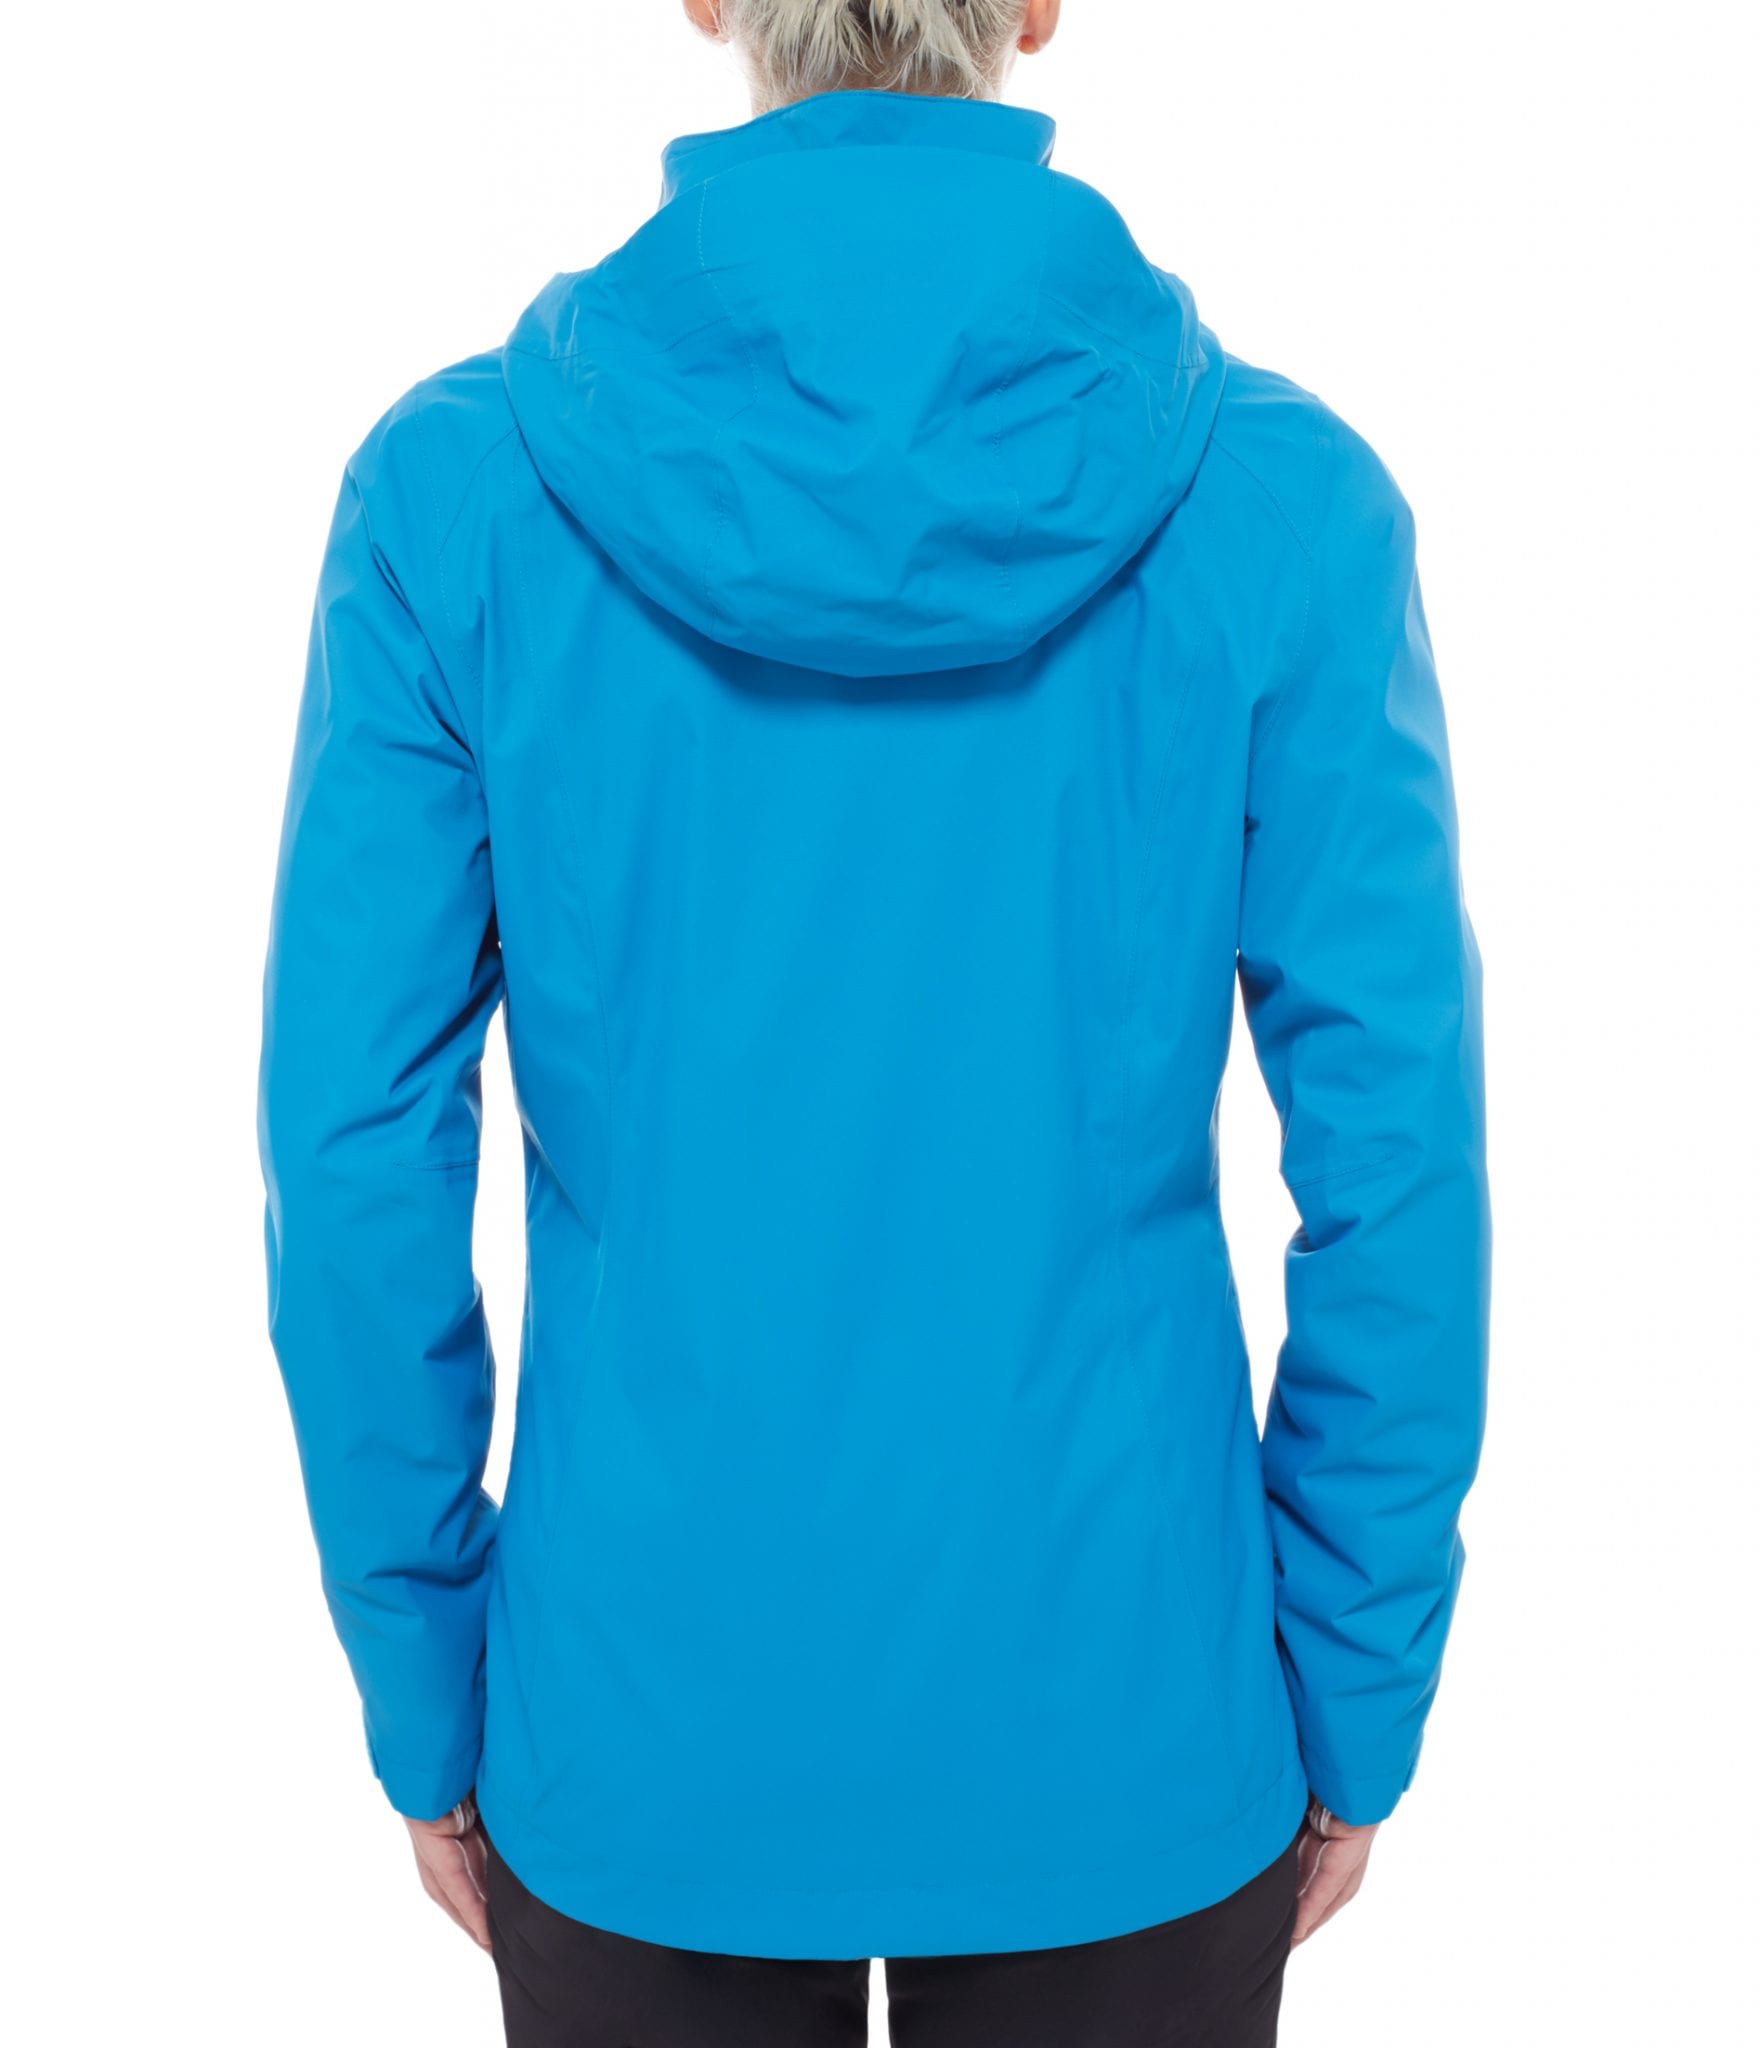 shop o-zone | The II triclimate Danish Face jacket : Evolve W – North blue